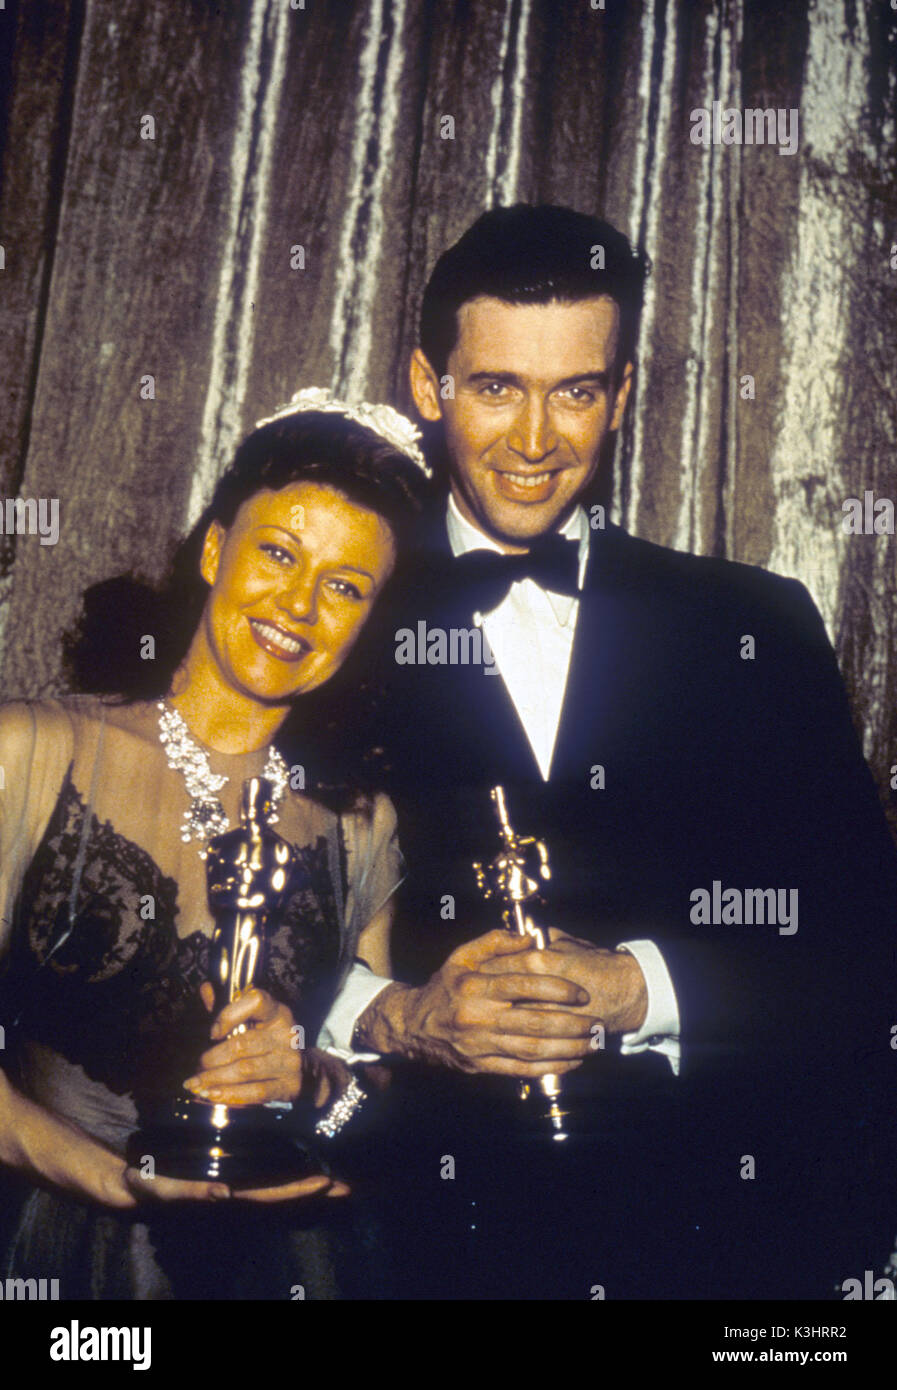 ACADEMY AWARDS CEREMONY 1940 Oscar for best actress - GINGER ROGERS in KITTY FOYLE Oscar for best actor - JAMES STEWART in The Philadelphia Story Stock Photo